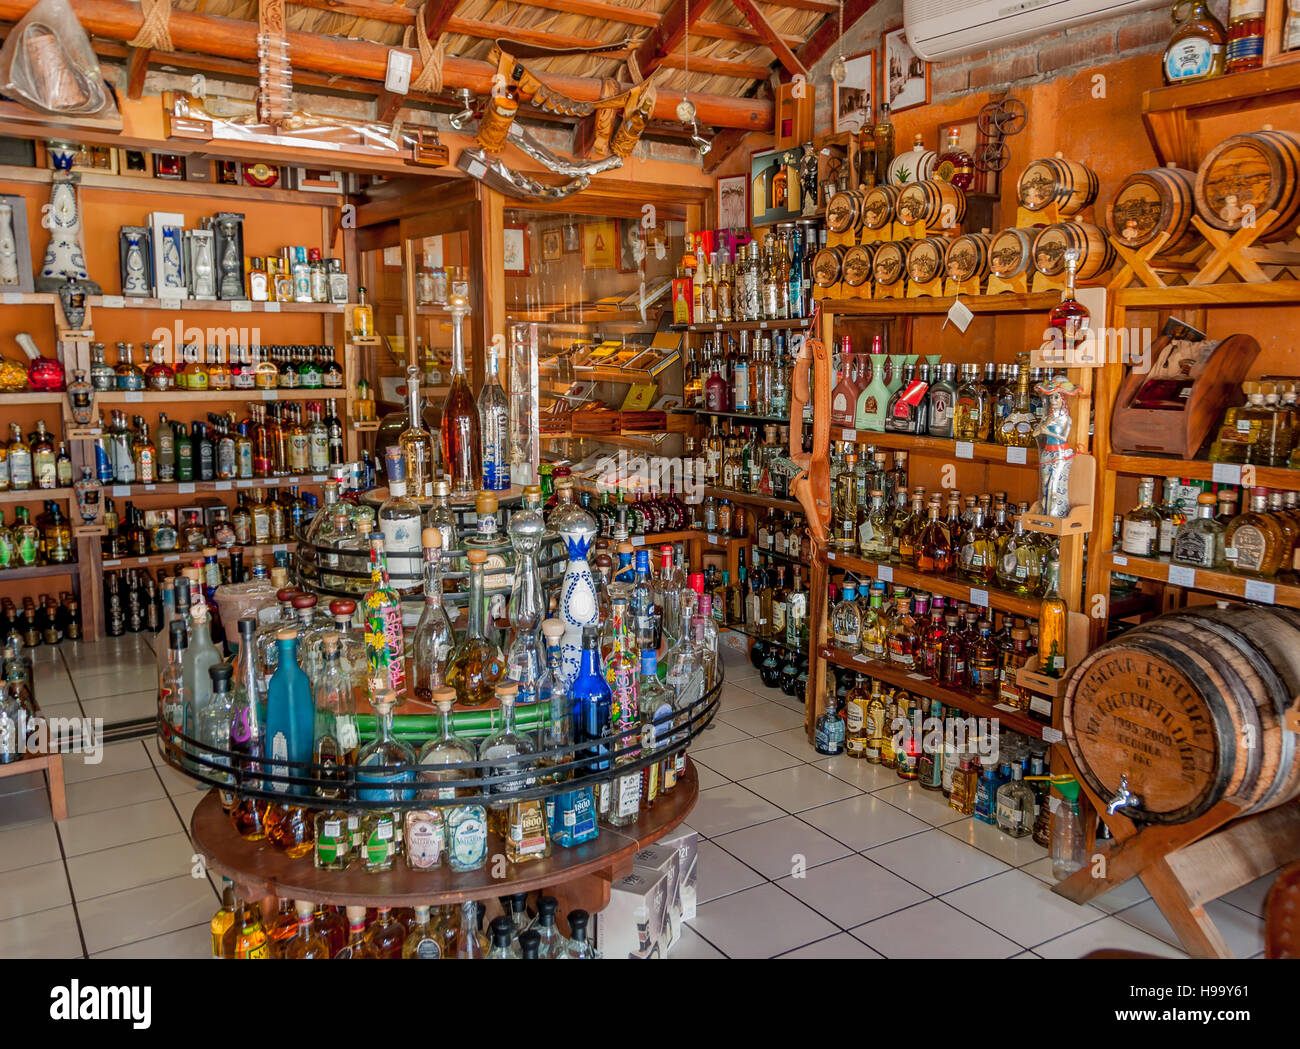 Tequila bottles and barrels on display inside tequila shop in San Jose del Cabo Old Town, Los Cabos, Mexico, Stock Photo